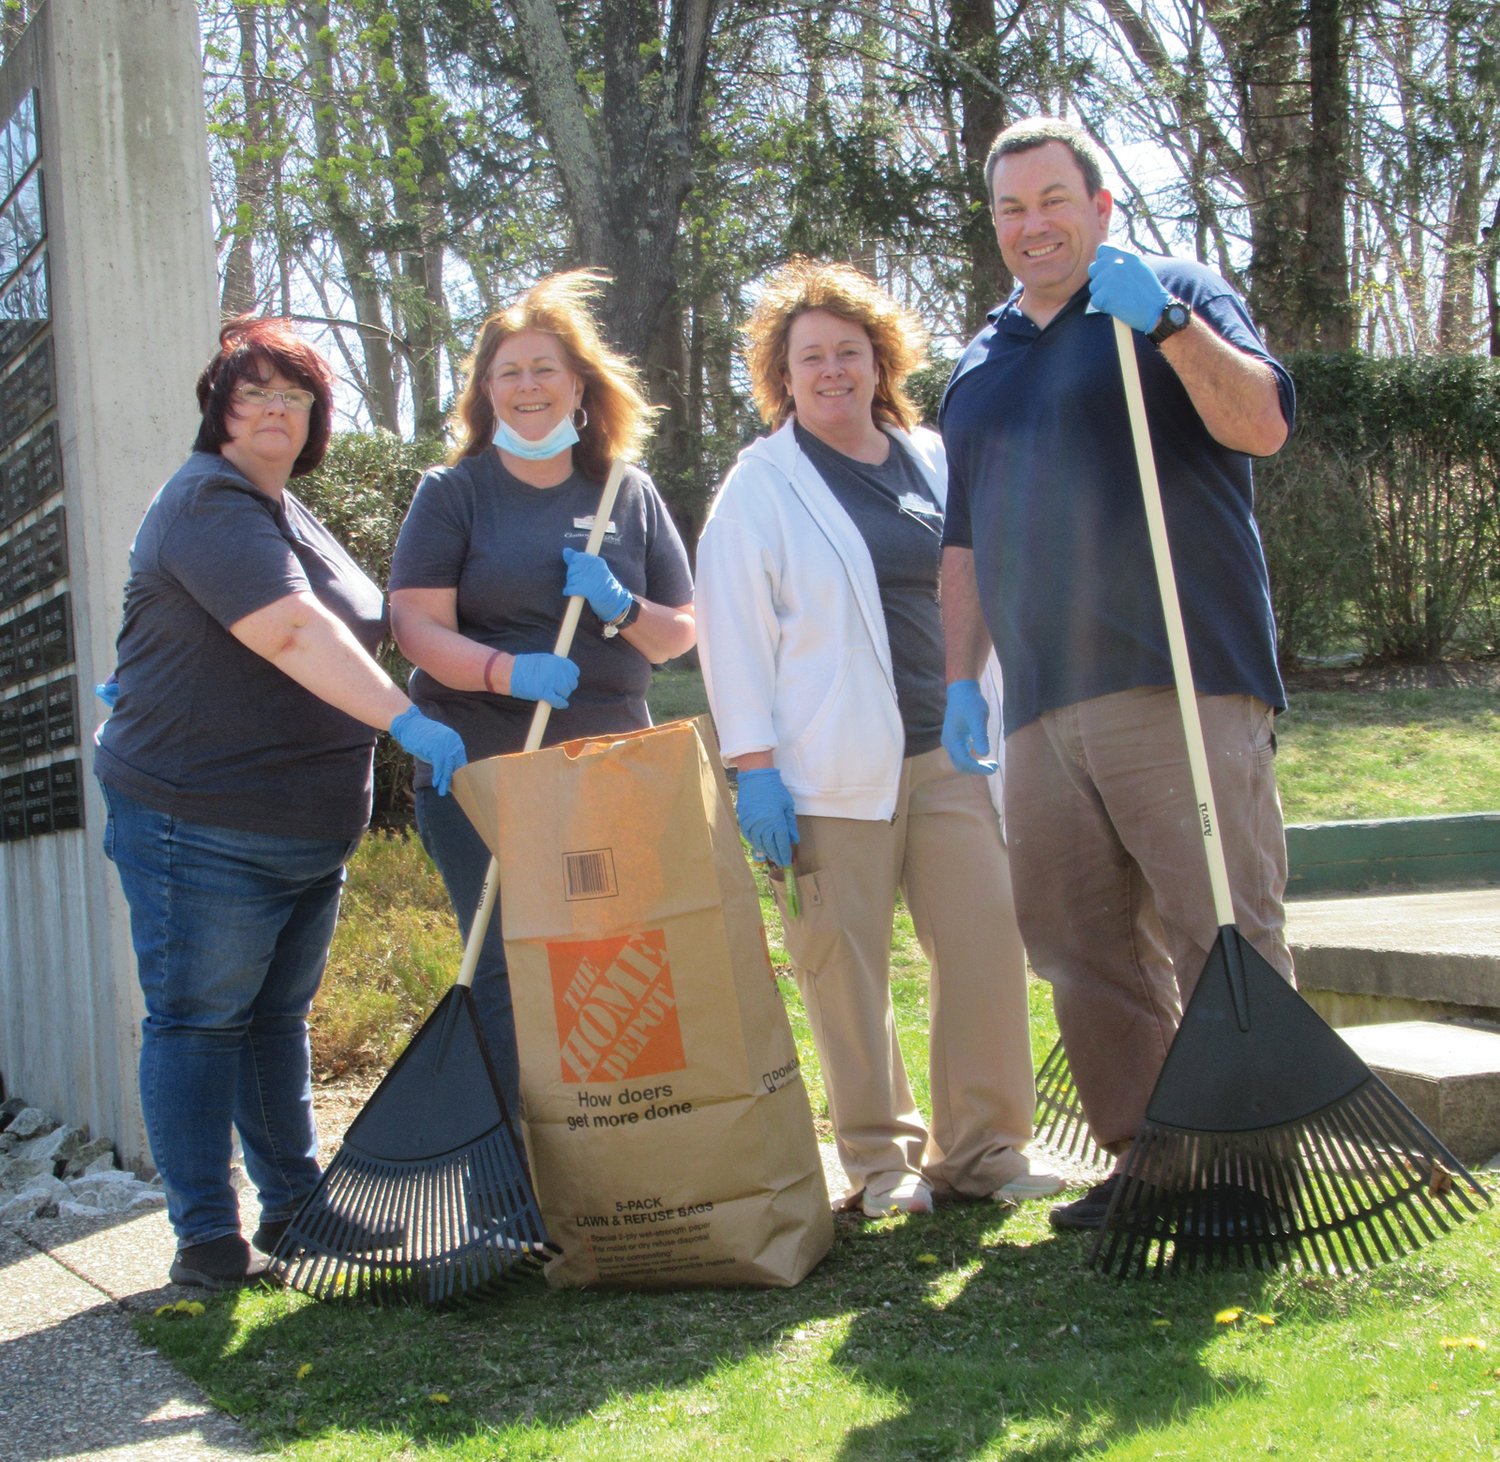 EARTH DAY: Deanna Lavendier, Rick Bigelli, Maryann Grace and Rhonda Simmons helped clean up Johnston for Earth Day.